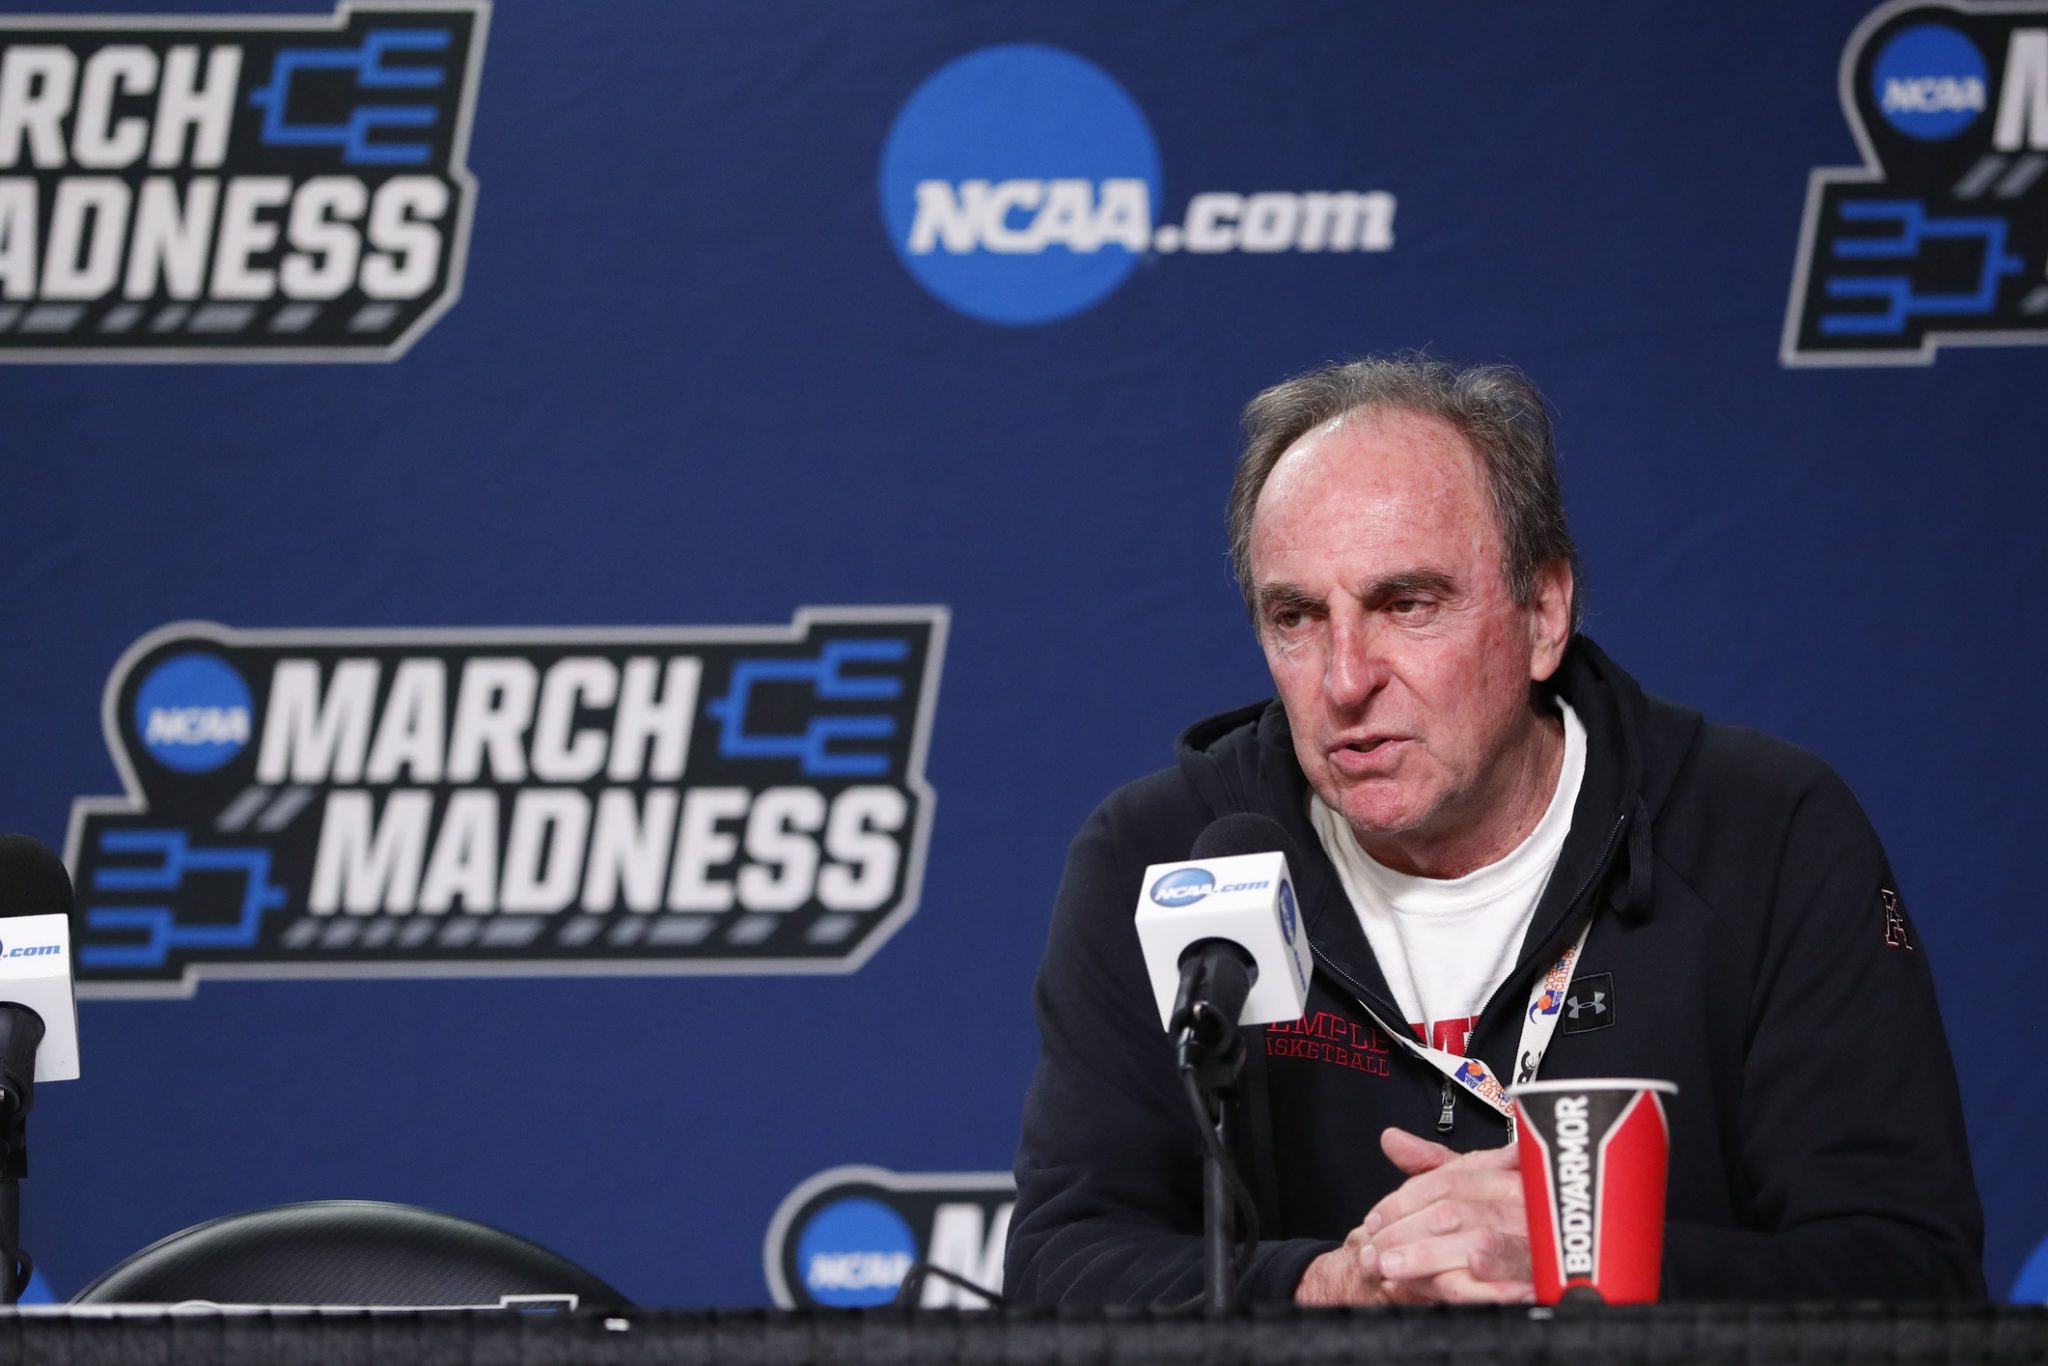 Fran Dunphy is Here to Save the La Salle Basketball Program